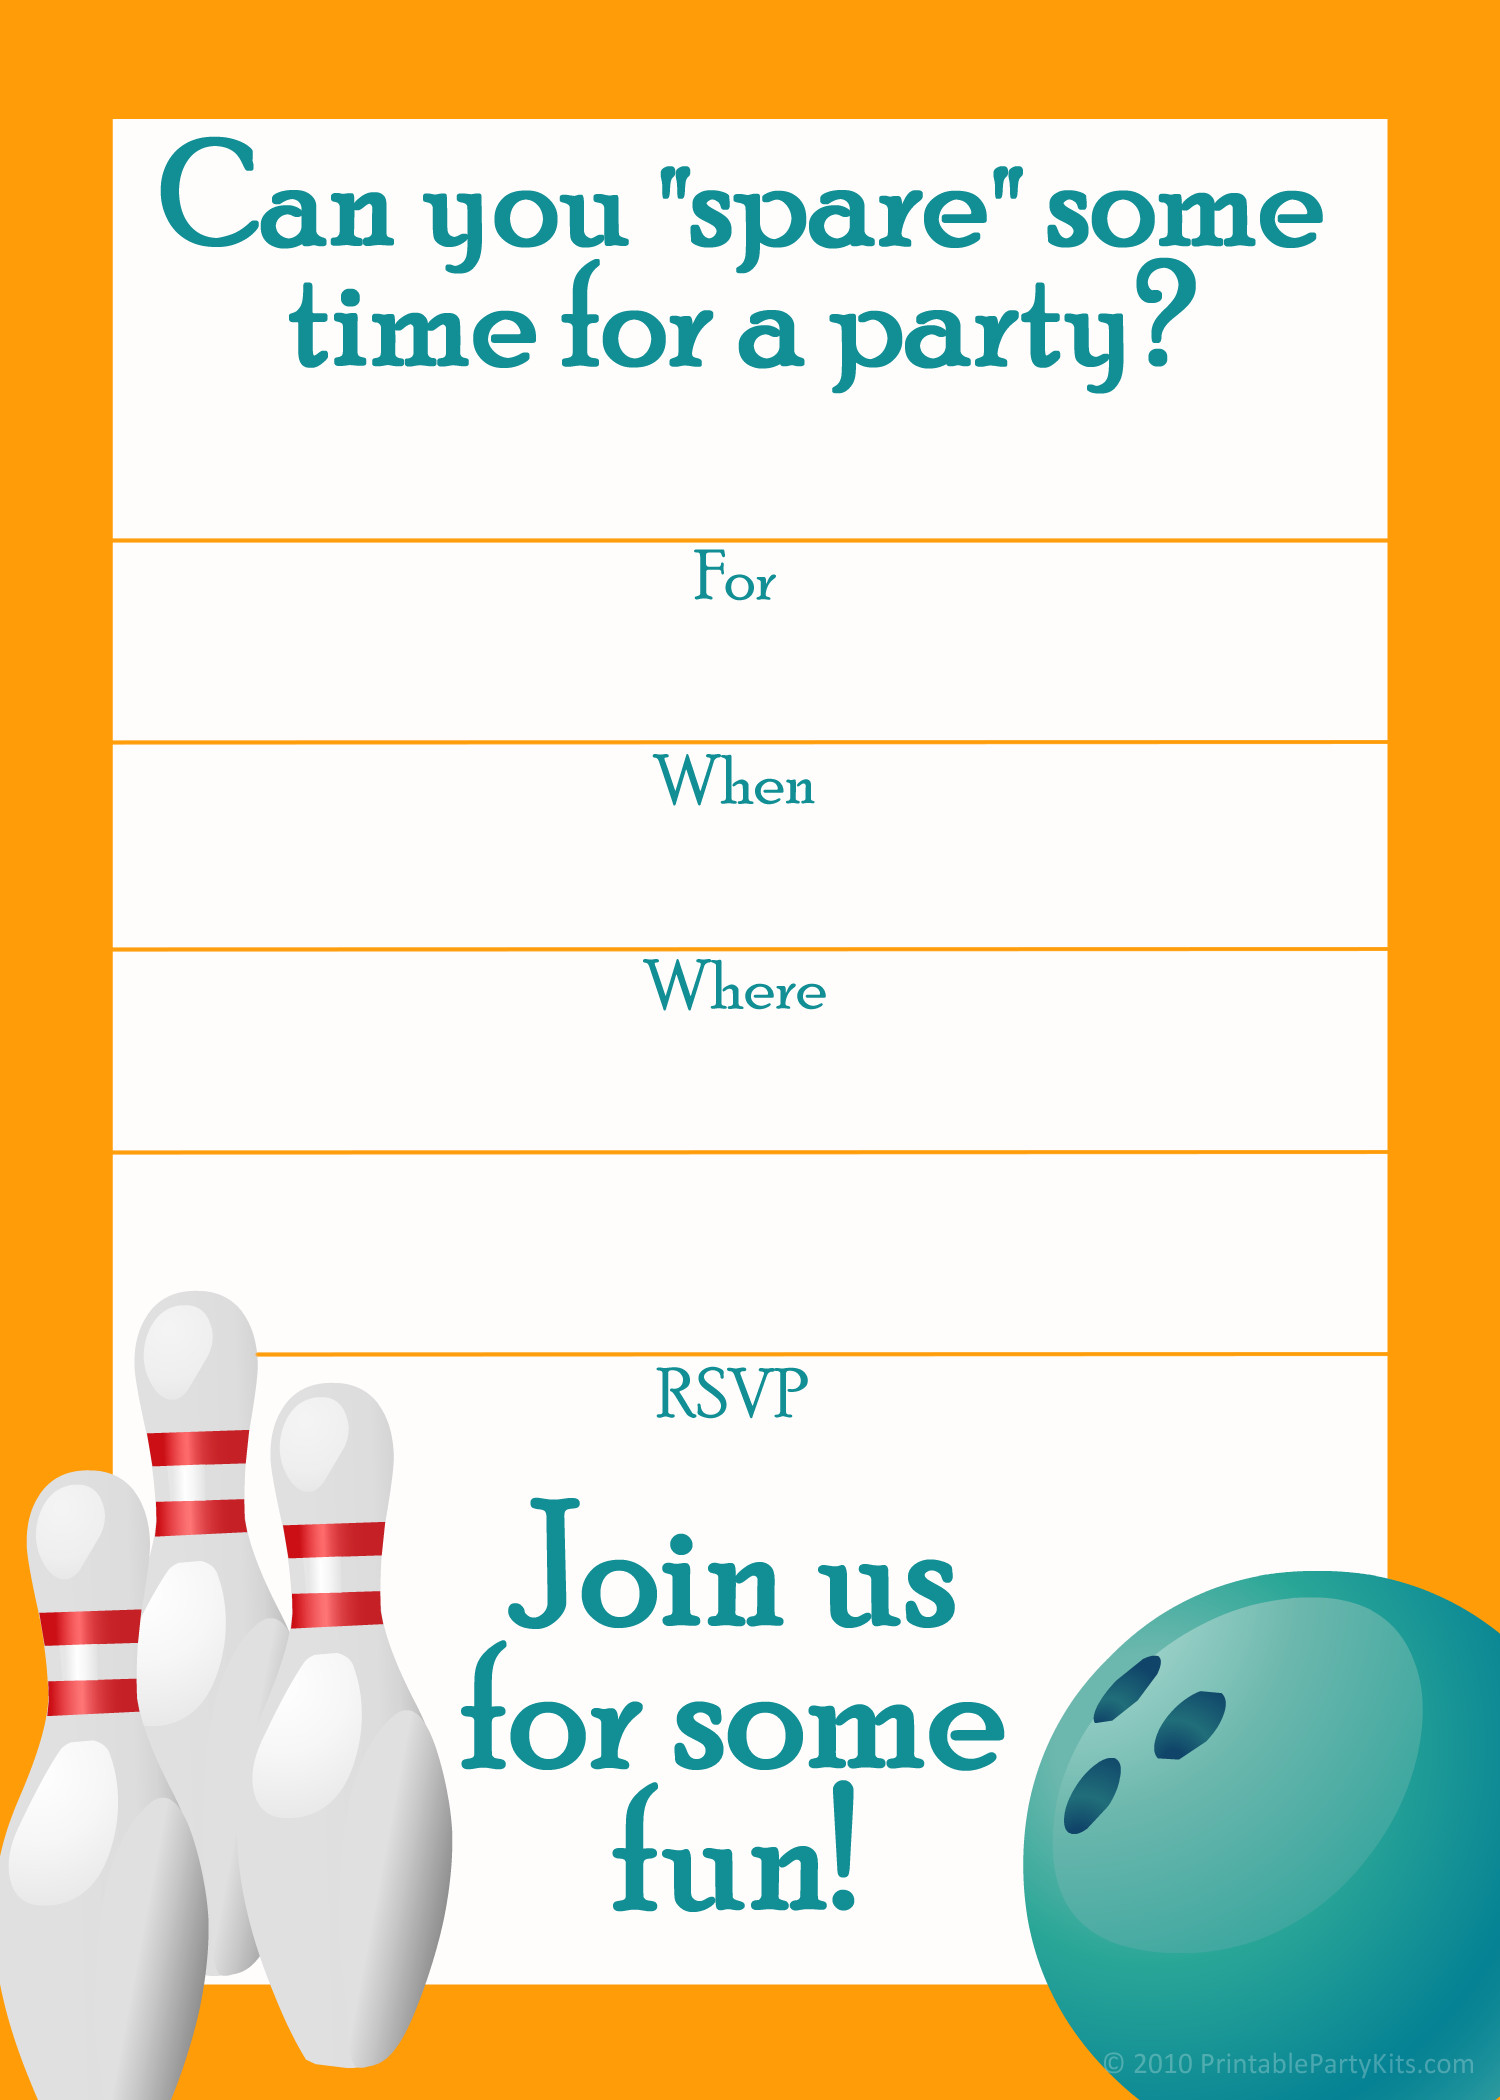 Free Printable Bowling Birthday Party Invitations
 Free Printable Sports Birthday Party Invitations Templates